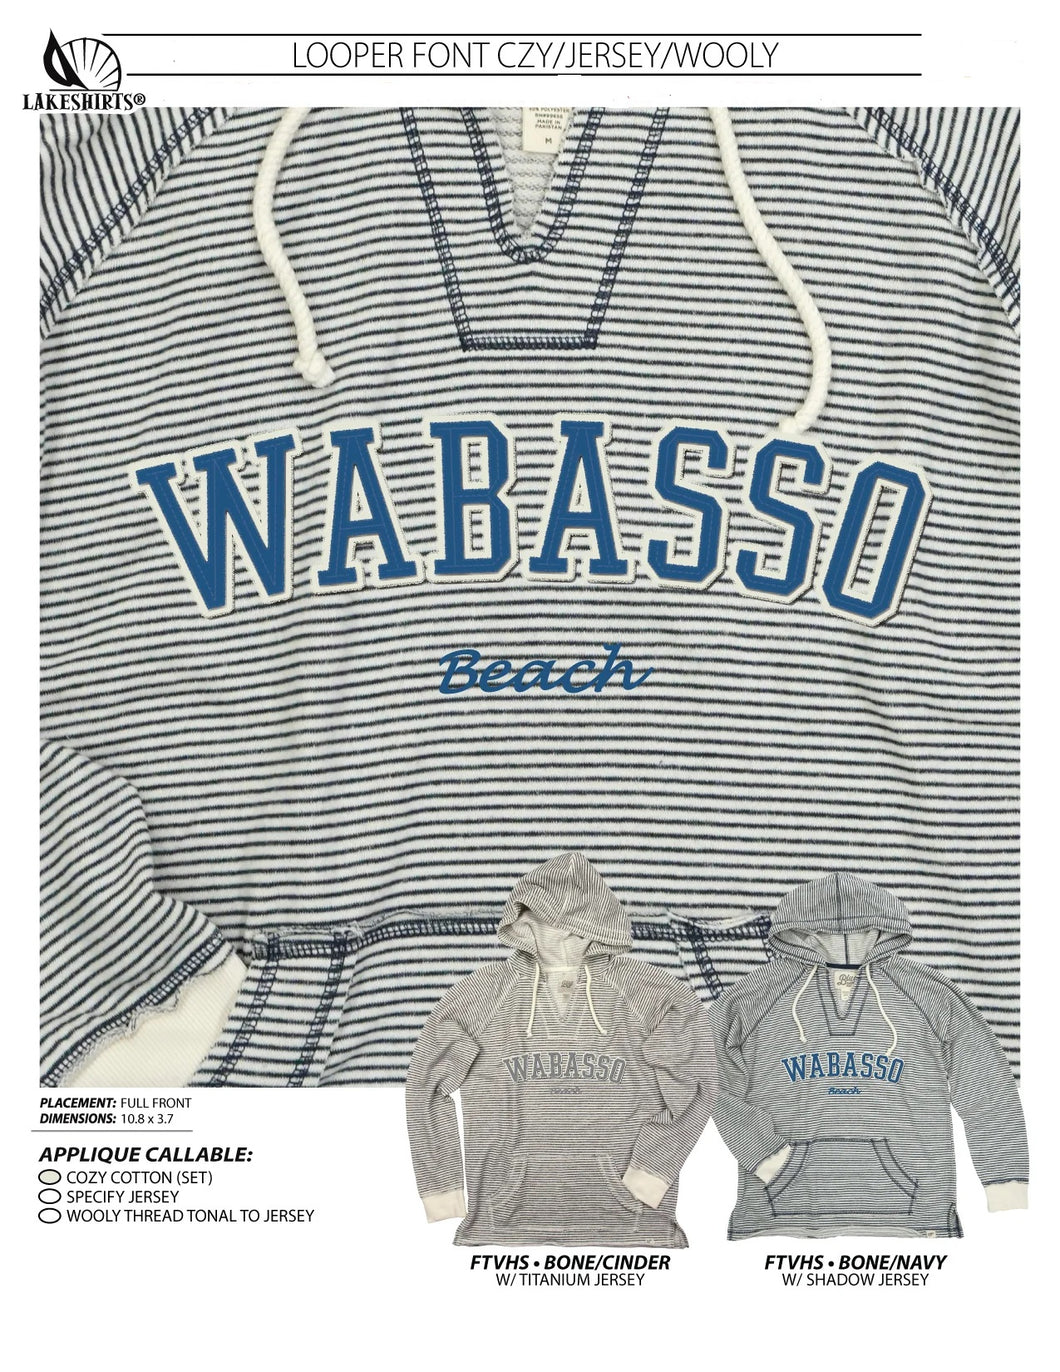 Blue 84 Looper Font Striped French Terry - Wabasso Beach Hooded Sweatshirt